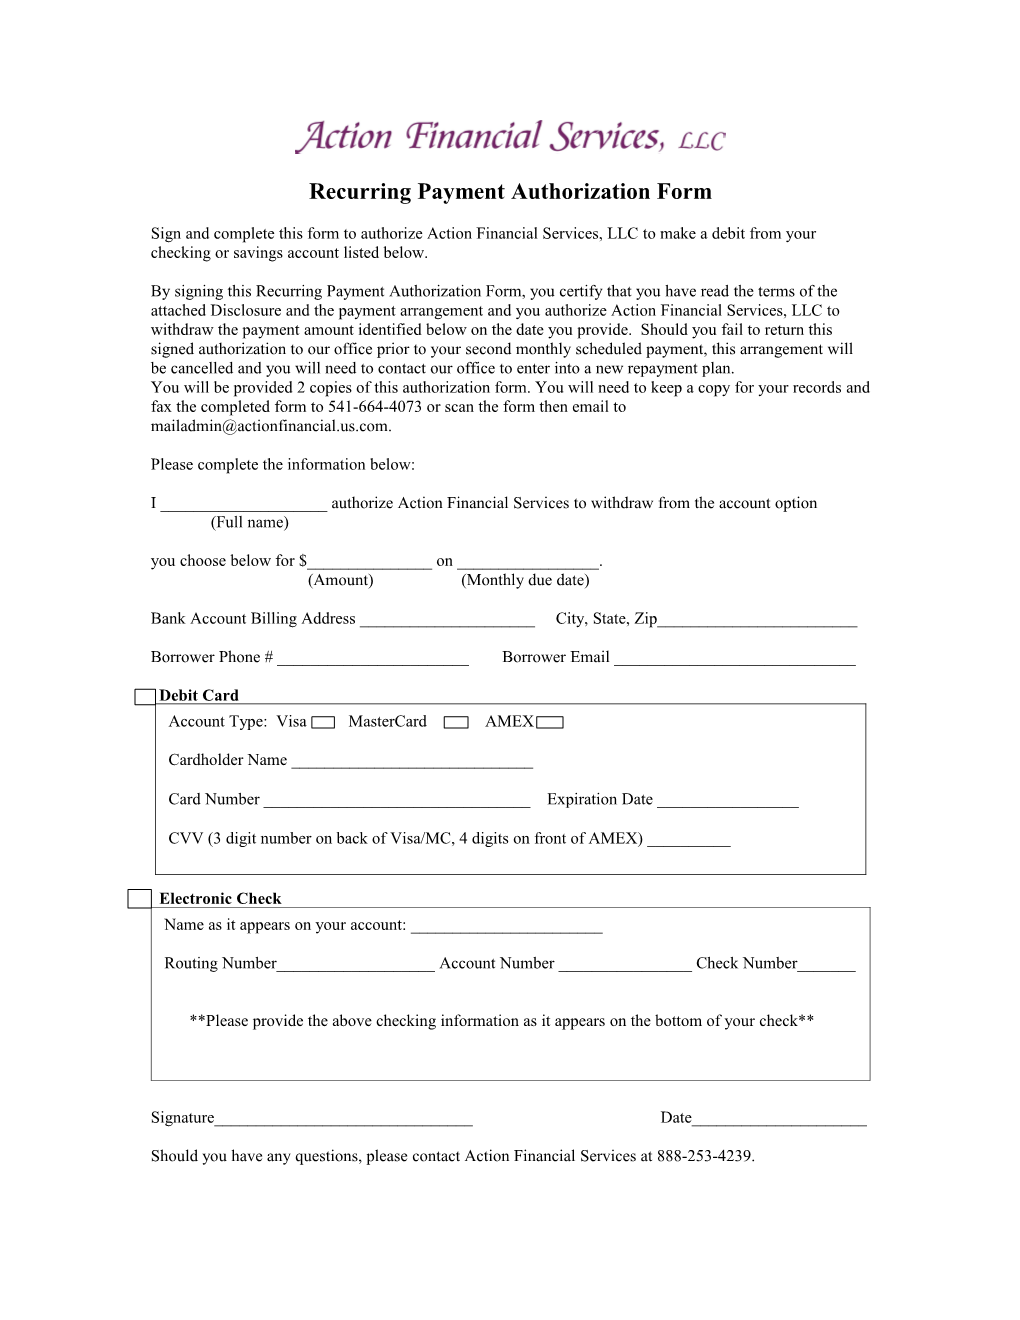 Recurring Payment Authorization Form